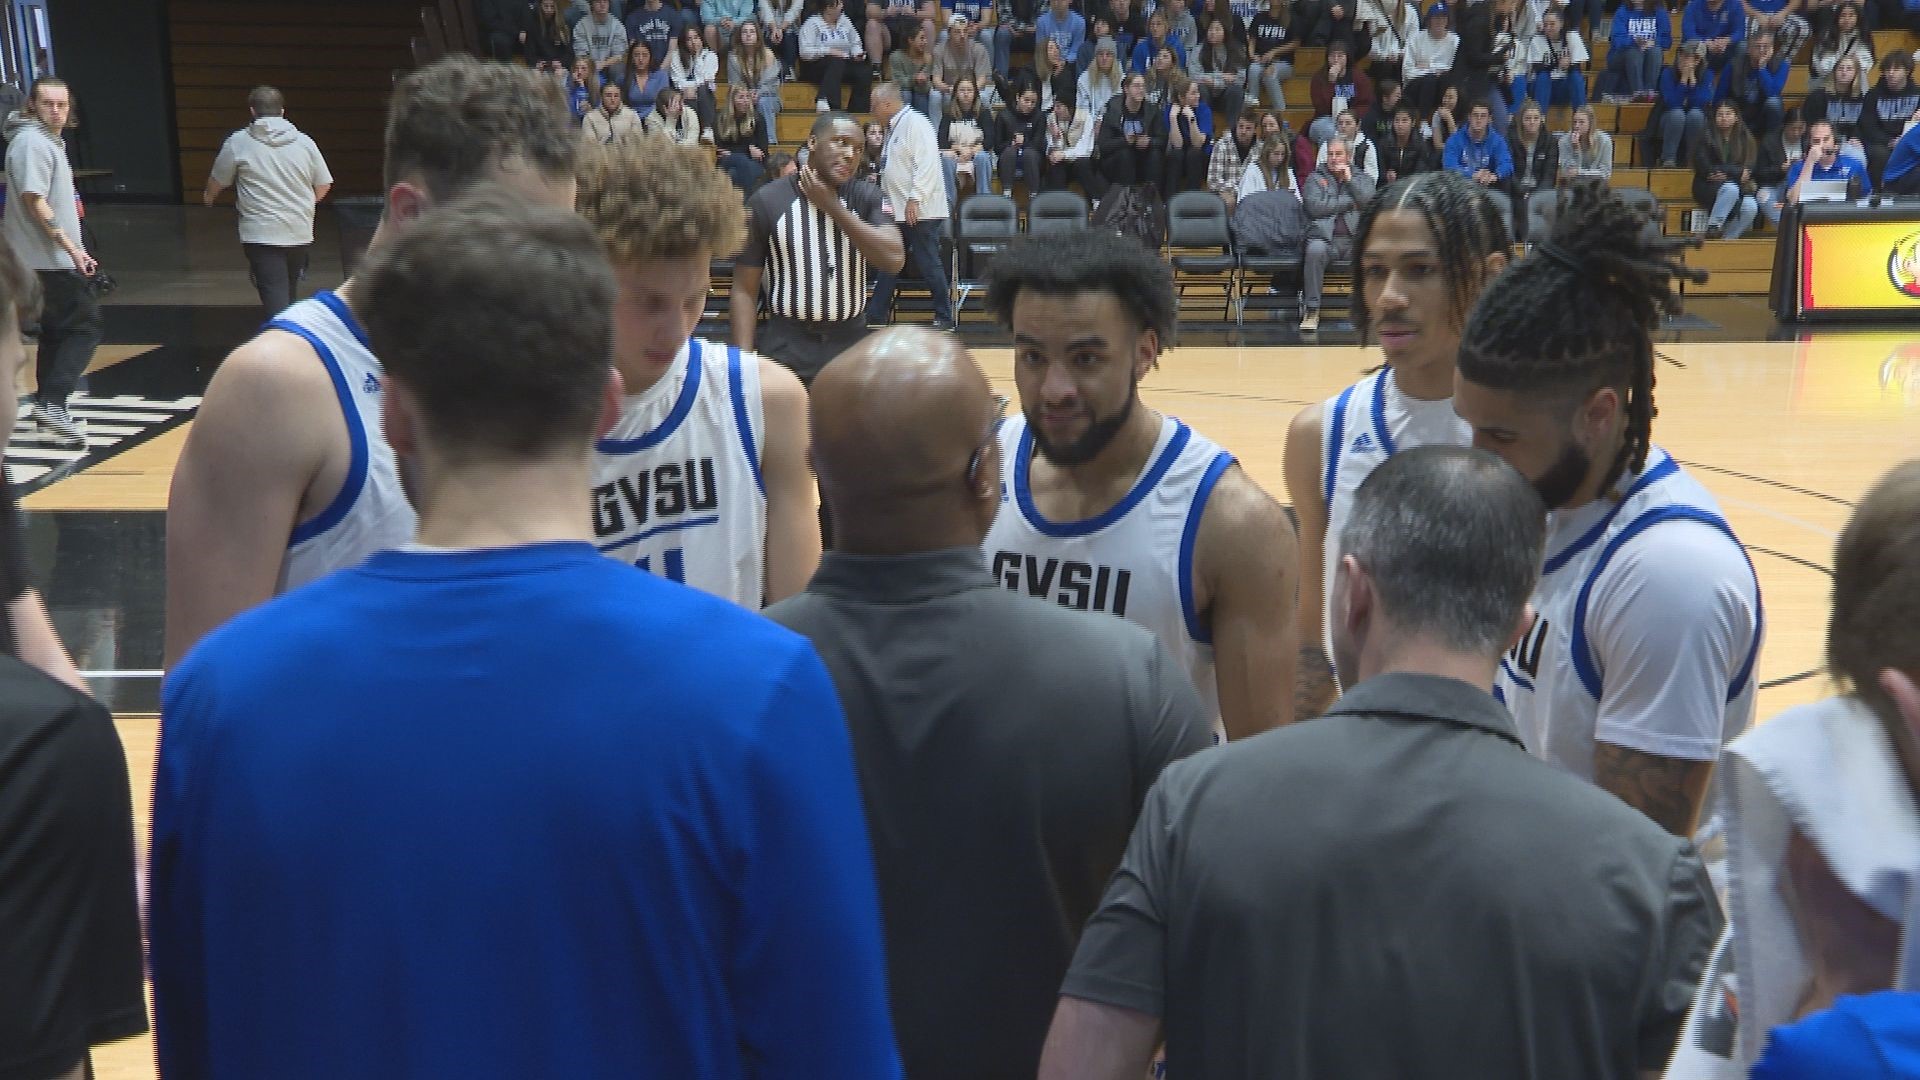 The Grand Valley State men’s basketball team came back to defeat Saginaw Valley, 66-62, on Saturday afternoon inside of the GVSU Fieldhouse Arena.